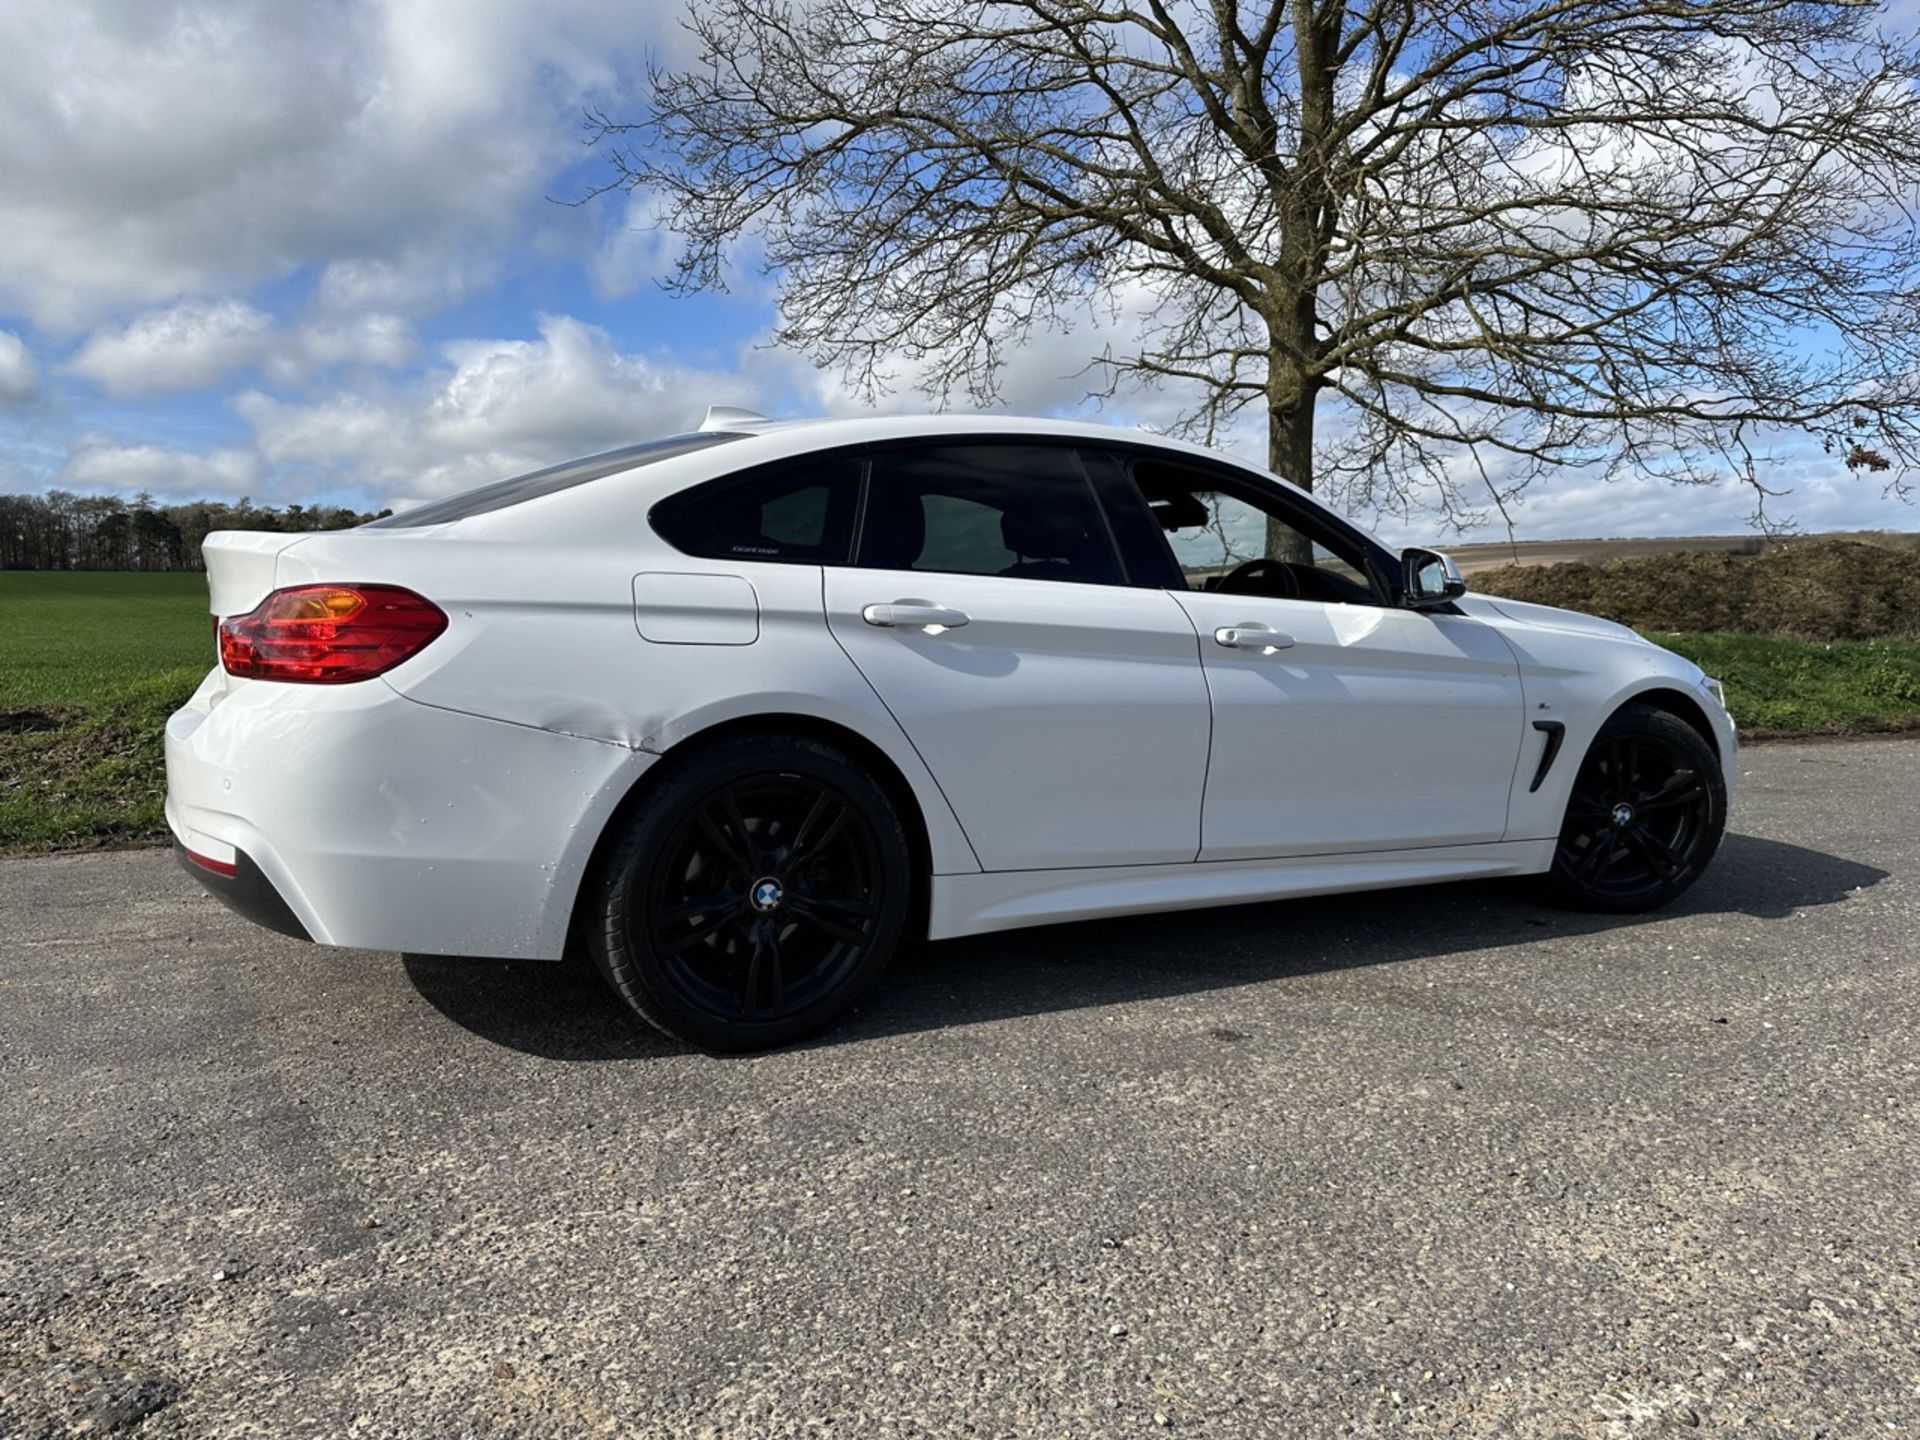 BMW 4 SERIES 420i M Sport 5dr [Professional Media] Manual - Petrol - 2.0 - Coupe- 54k miles - 2016 - Image 3 of 15